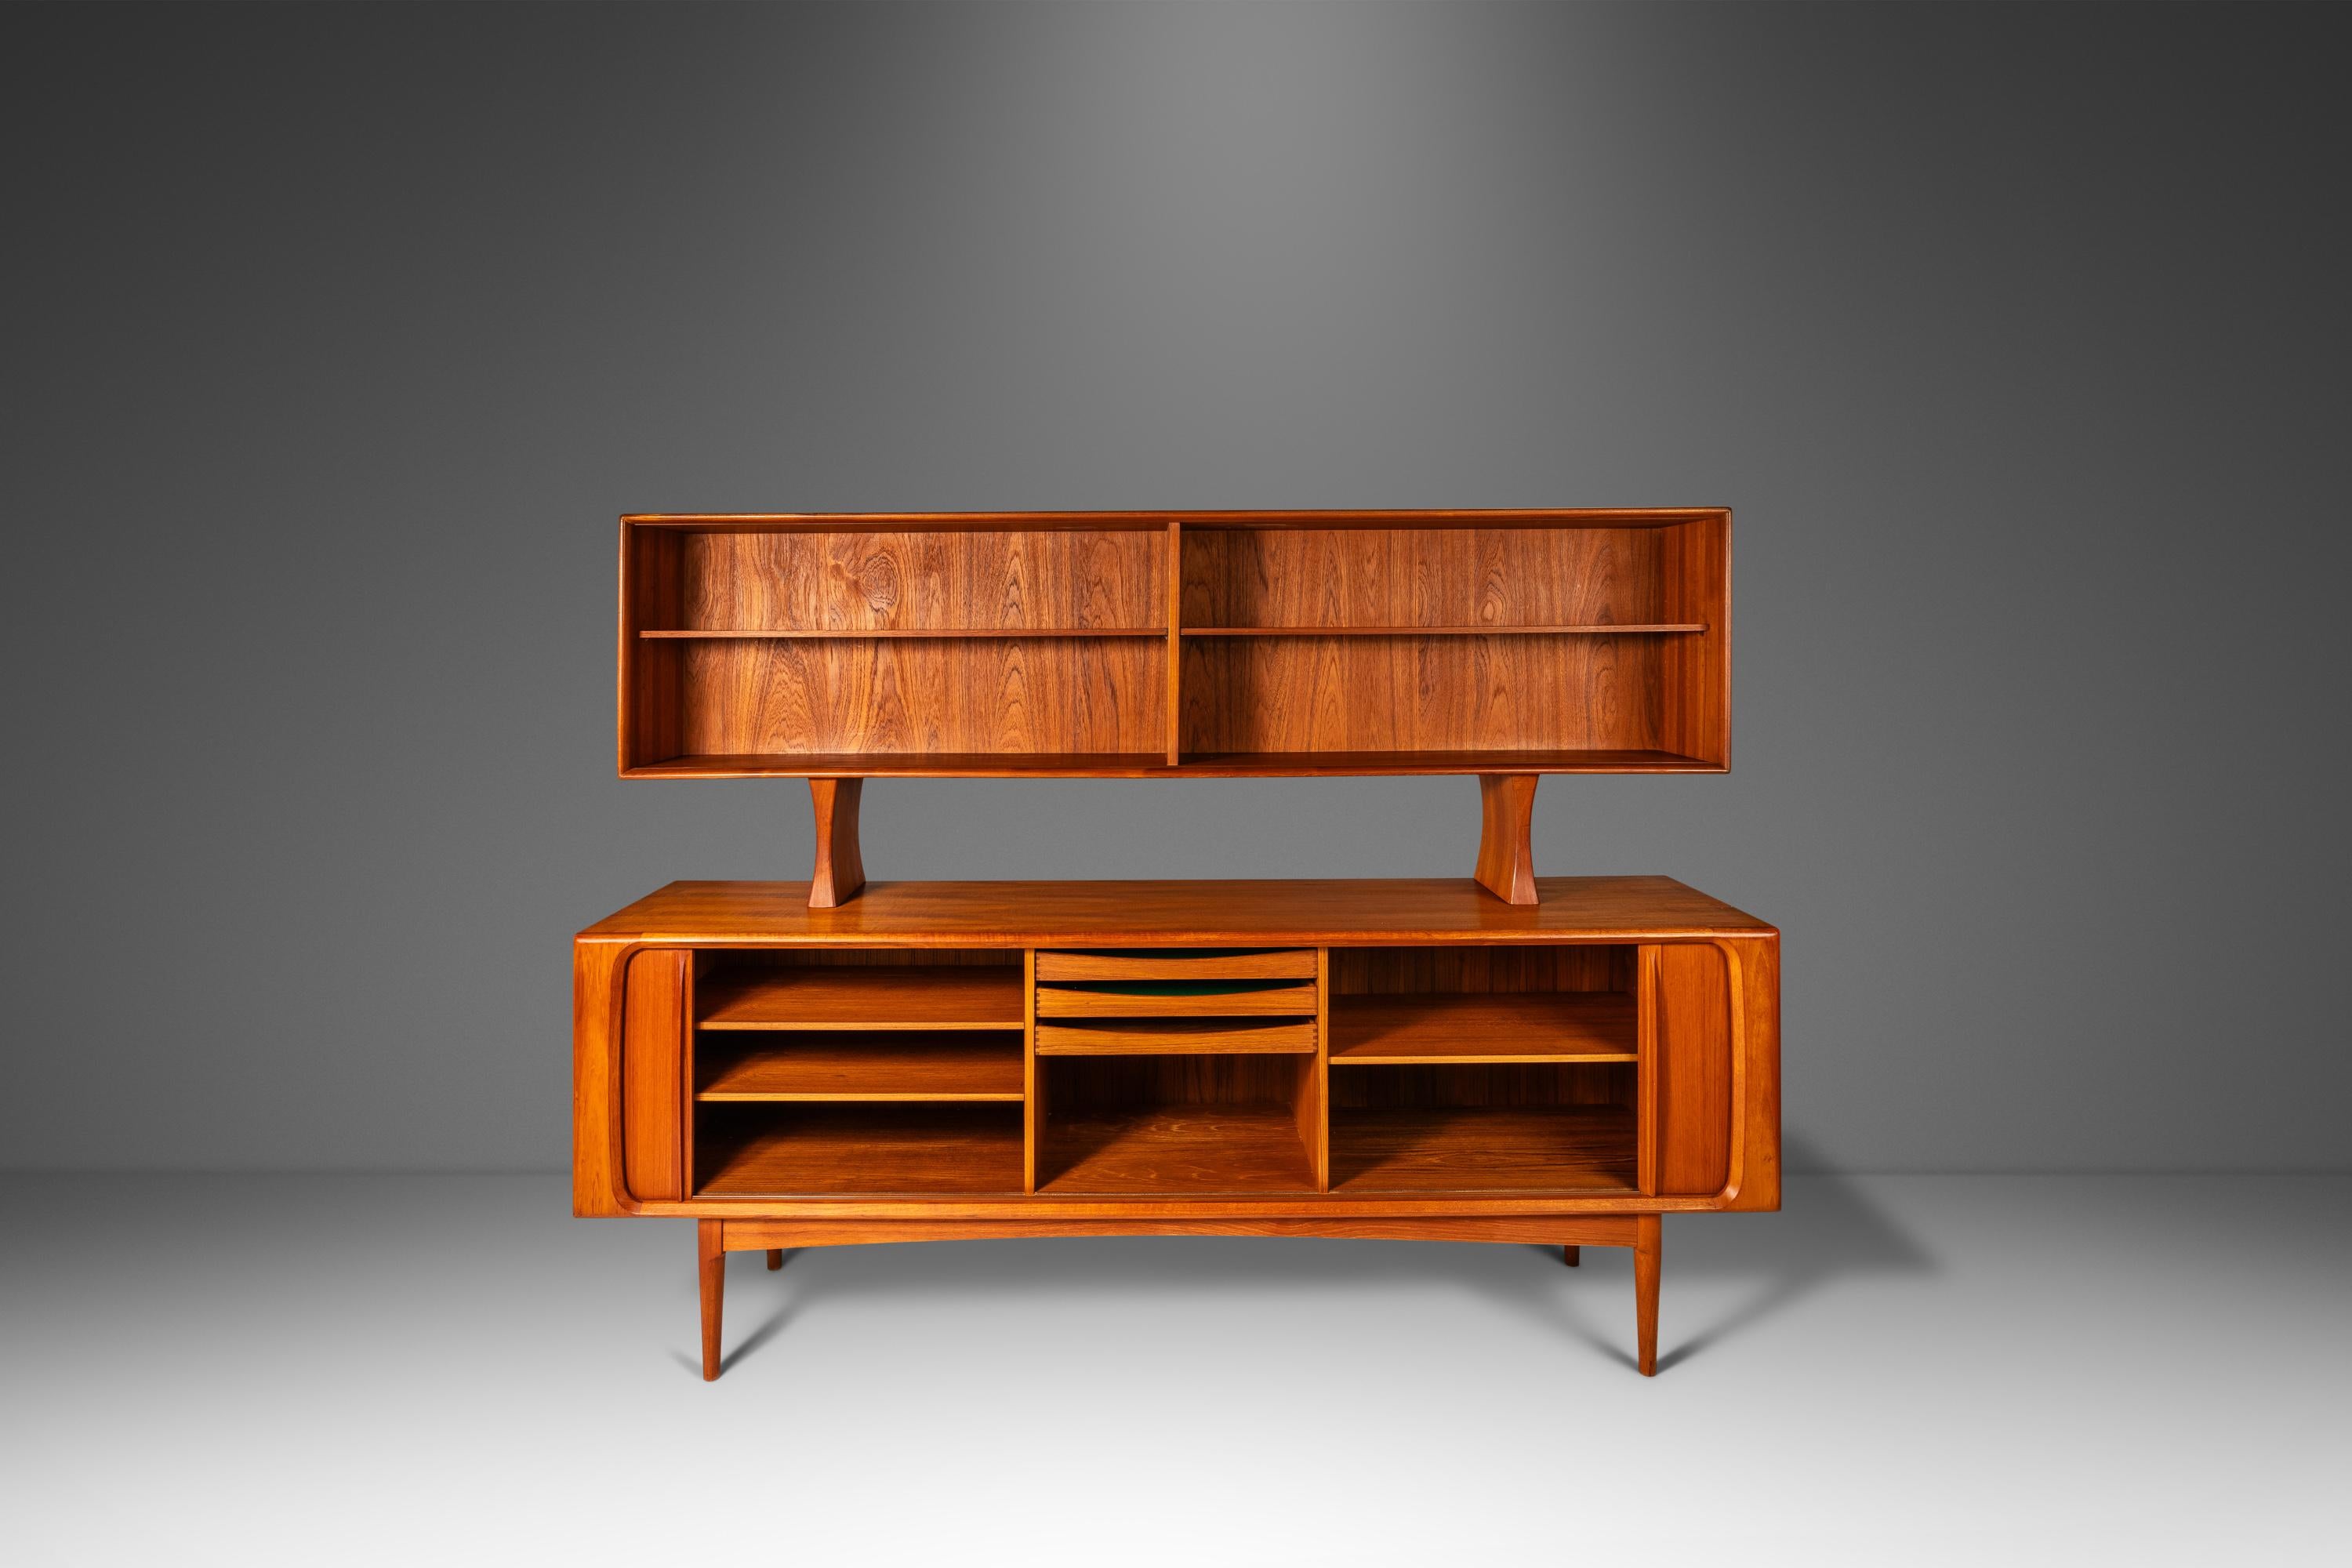 Audacious in scope, design and materials used this extraordinary Danish-made double decker credenza is as functional as it is visually arresting. Constructed from a mix of solid and matchbook-veneered Burmese teak this striking two-piece set is